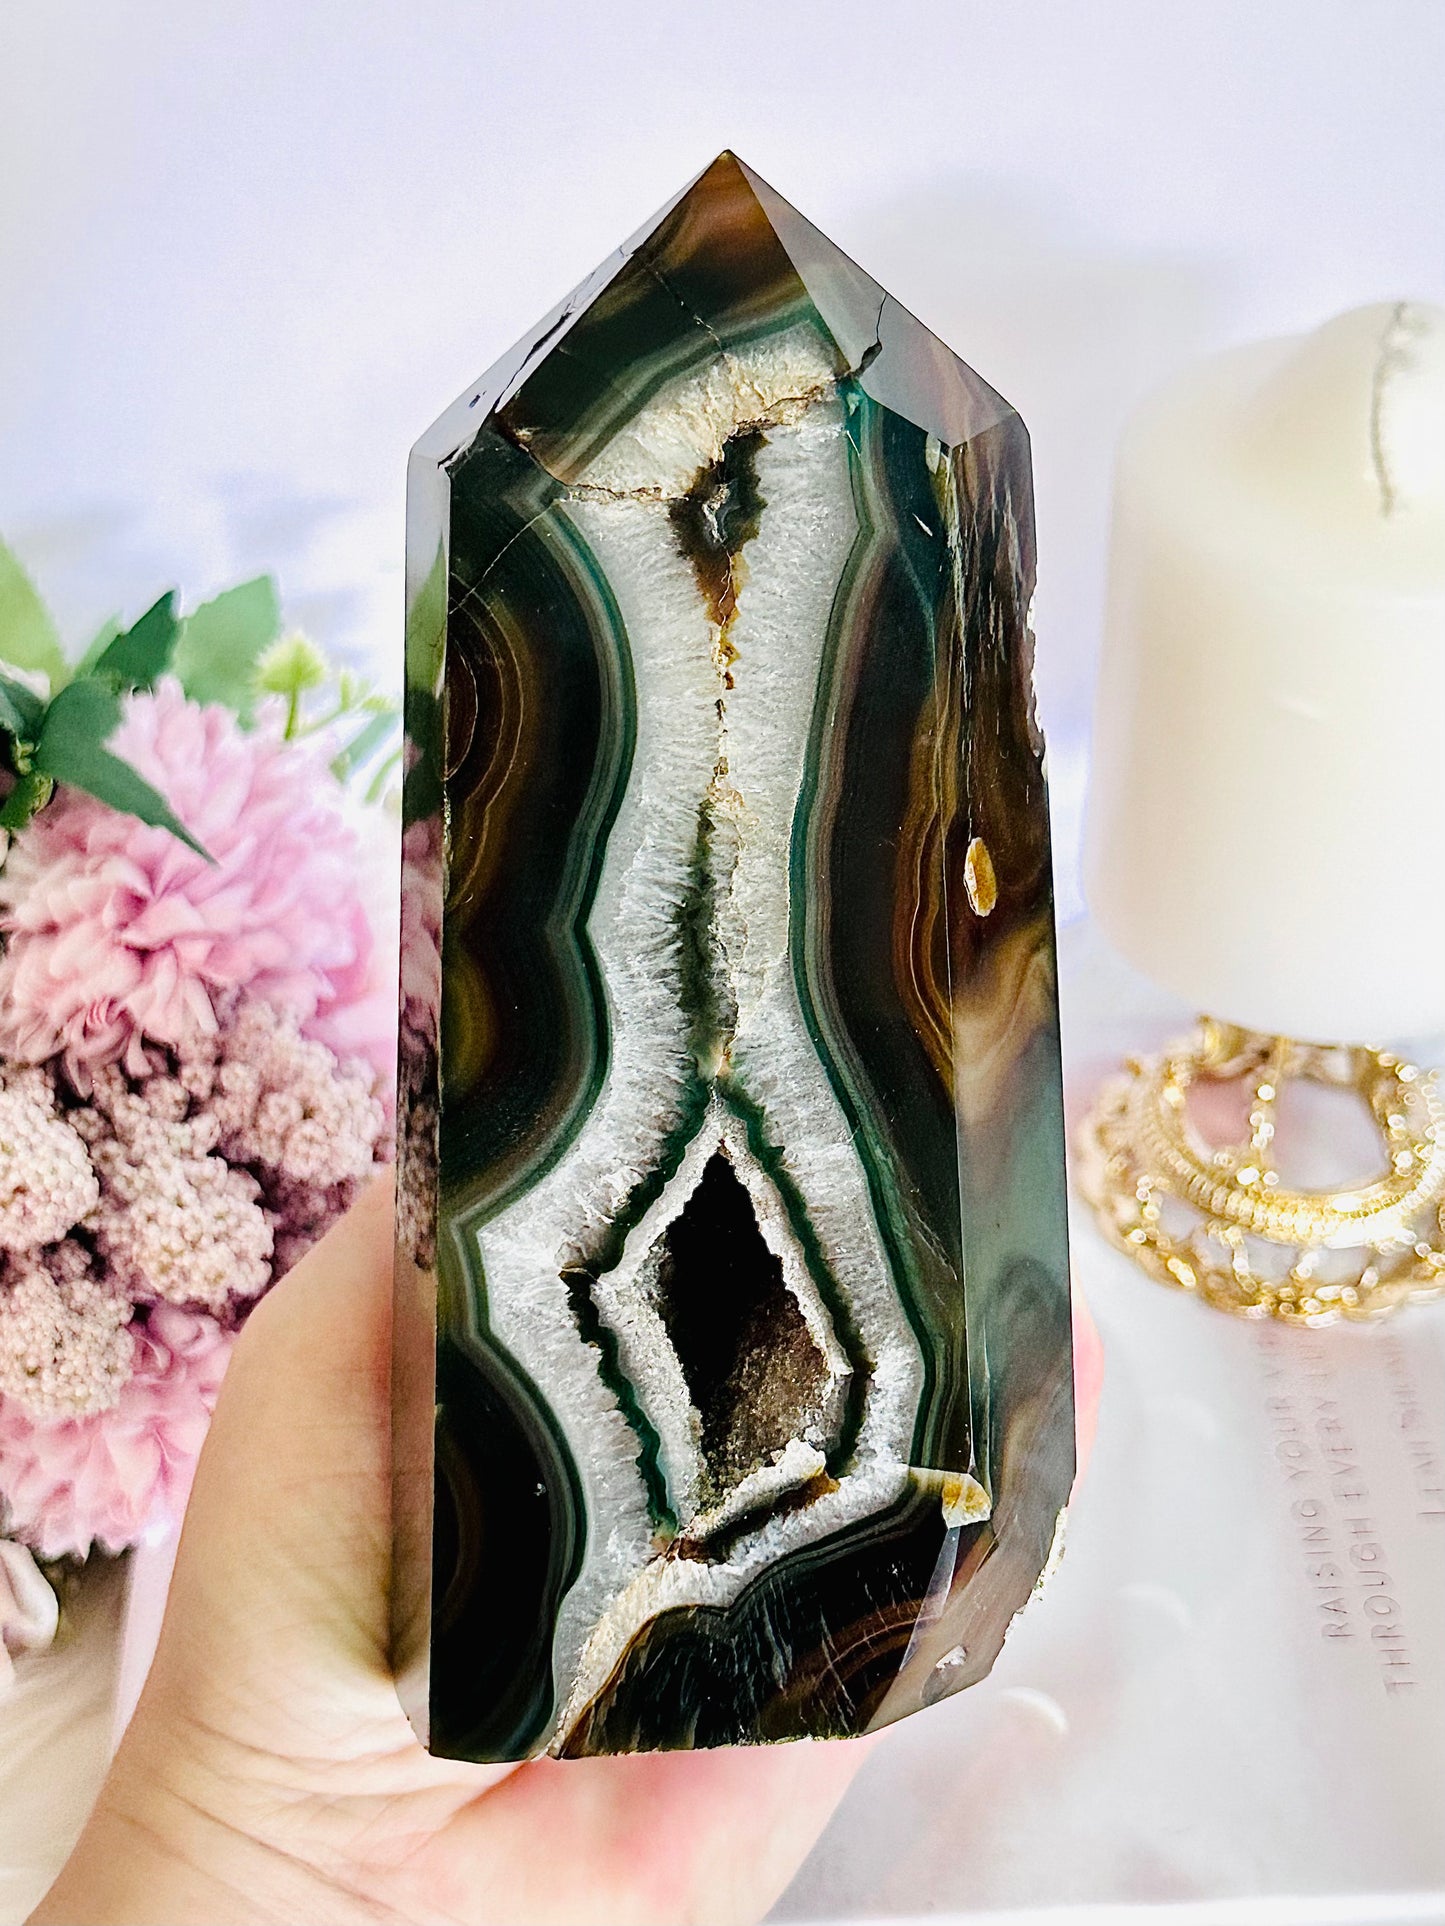 What A Stunner!!!! Absolutely Divine Large Chunky 932gram Druzy Agate Tower From Brazil ~ Reduced Due To Hair Line Cracks